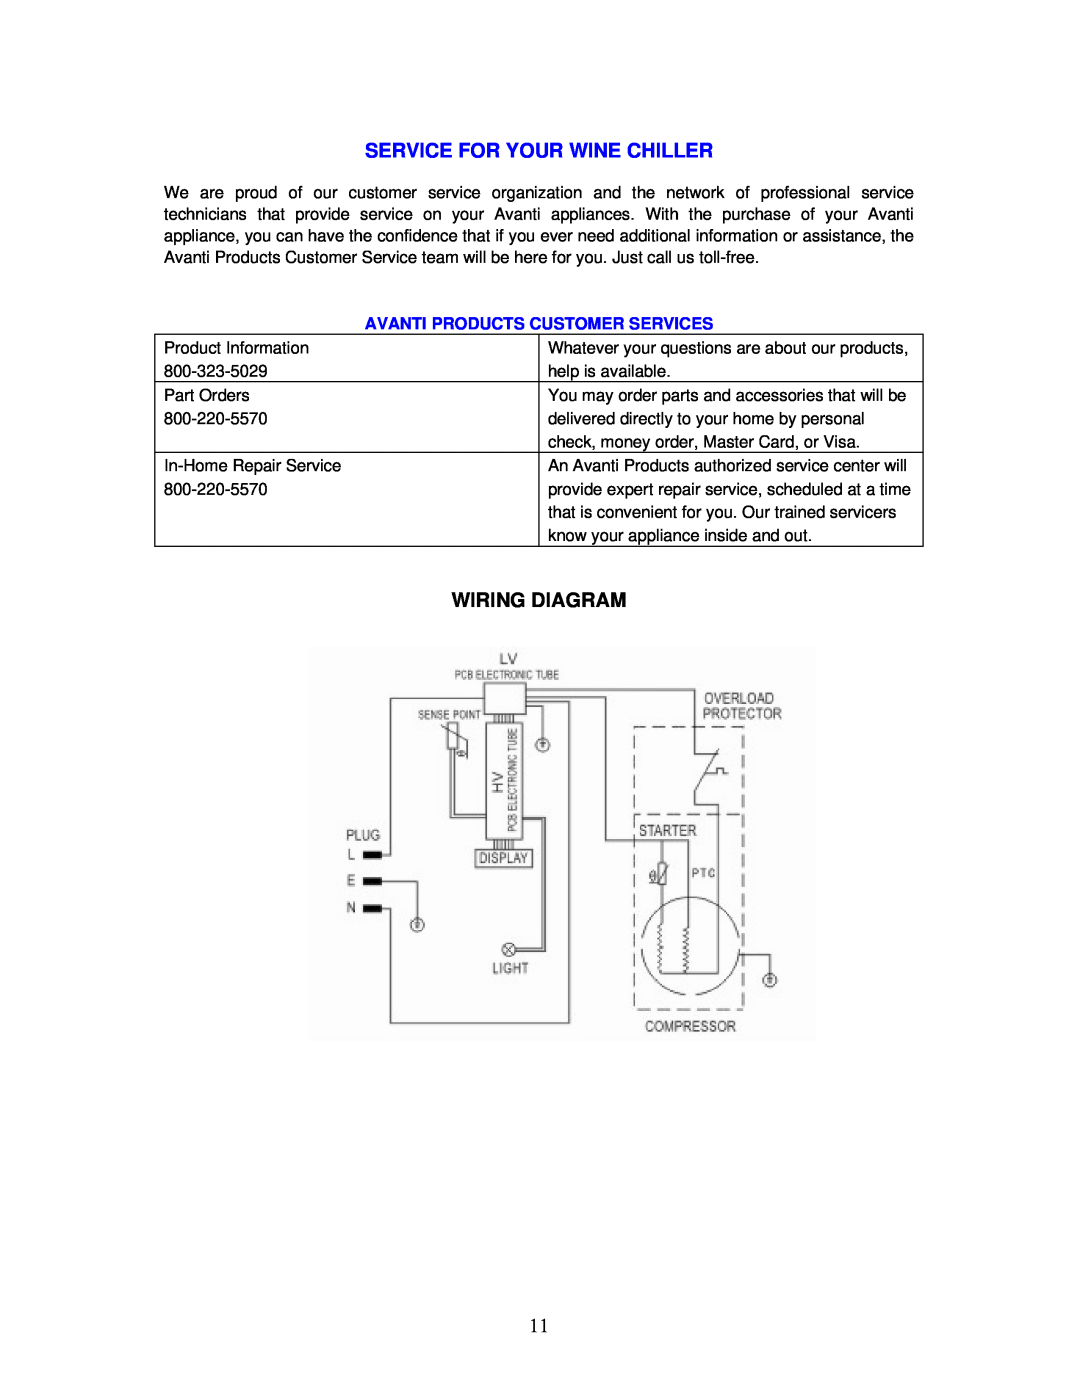 Avanti WC494D instruction manual Service For Your Wine Chiller, Wiring Diagram 